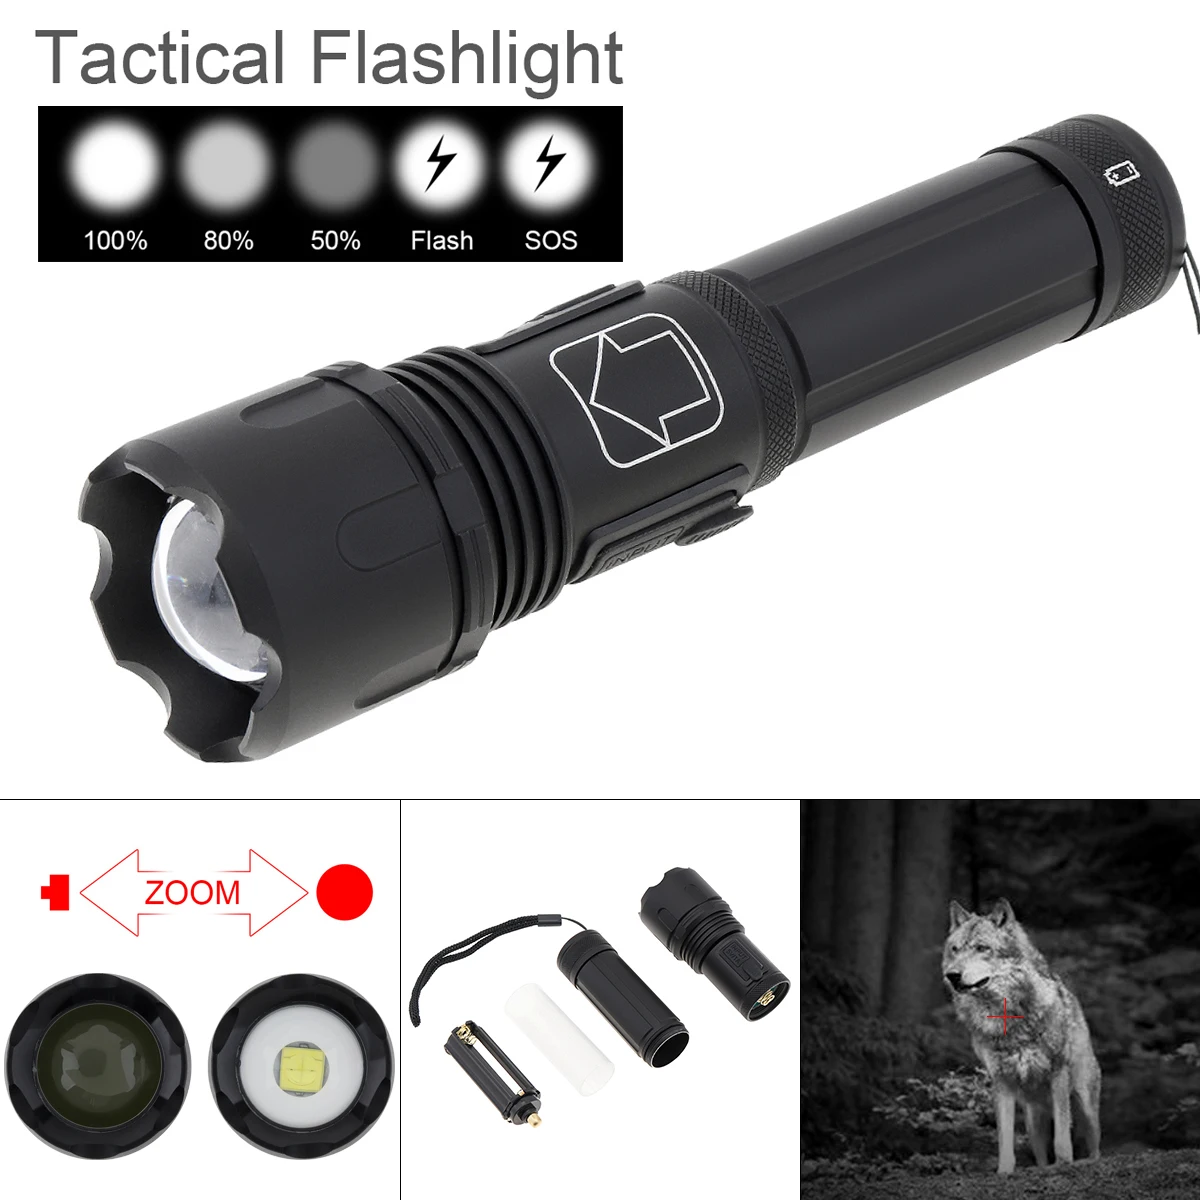 

Waterproof Powerful P50 LED USB Rechargeable Mini Outdoor Tactical Hunting Flashlight Zoomable Waterproof 5-Modes New